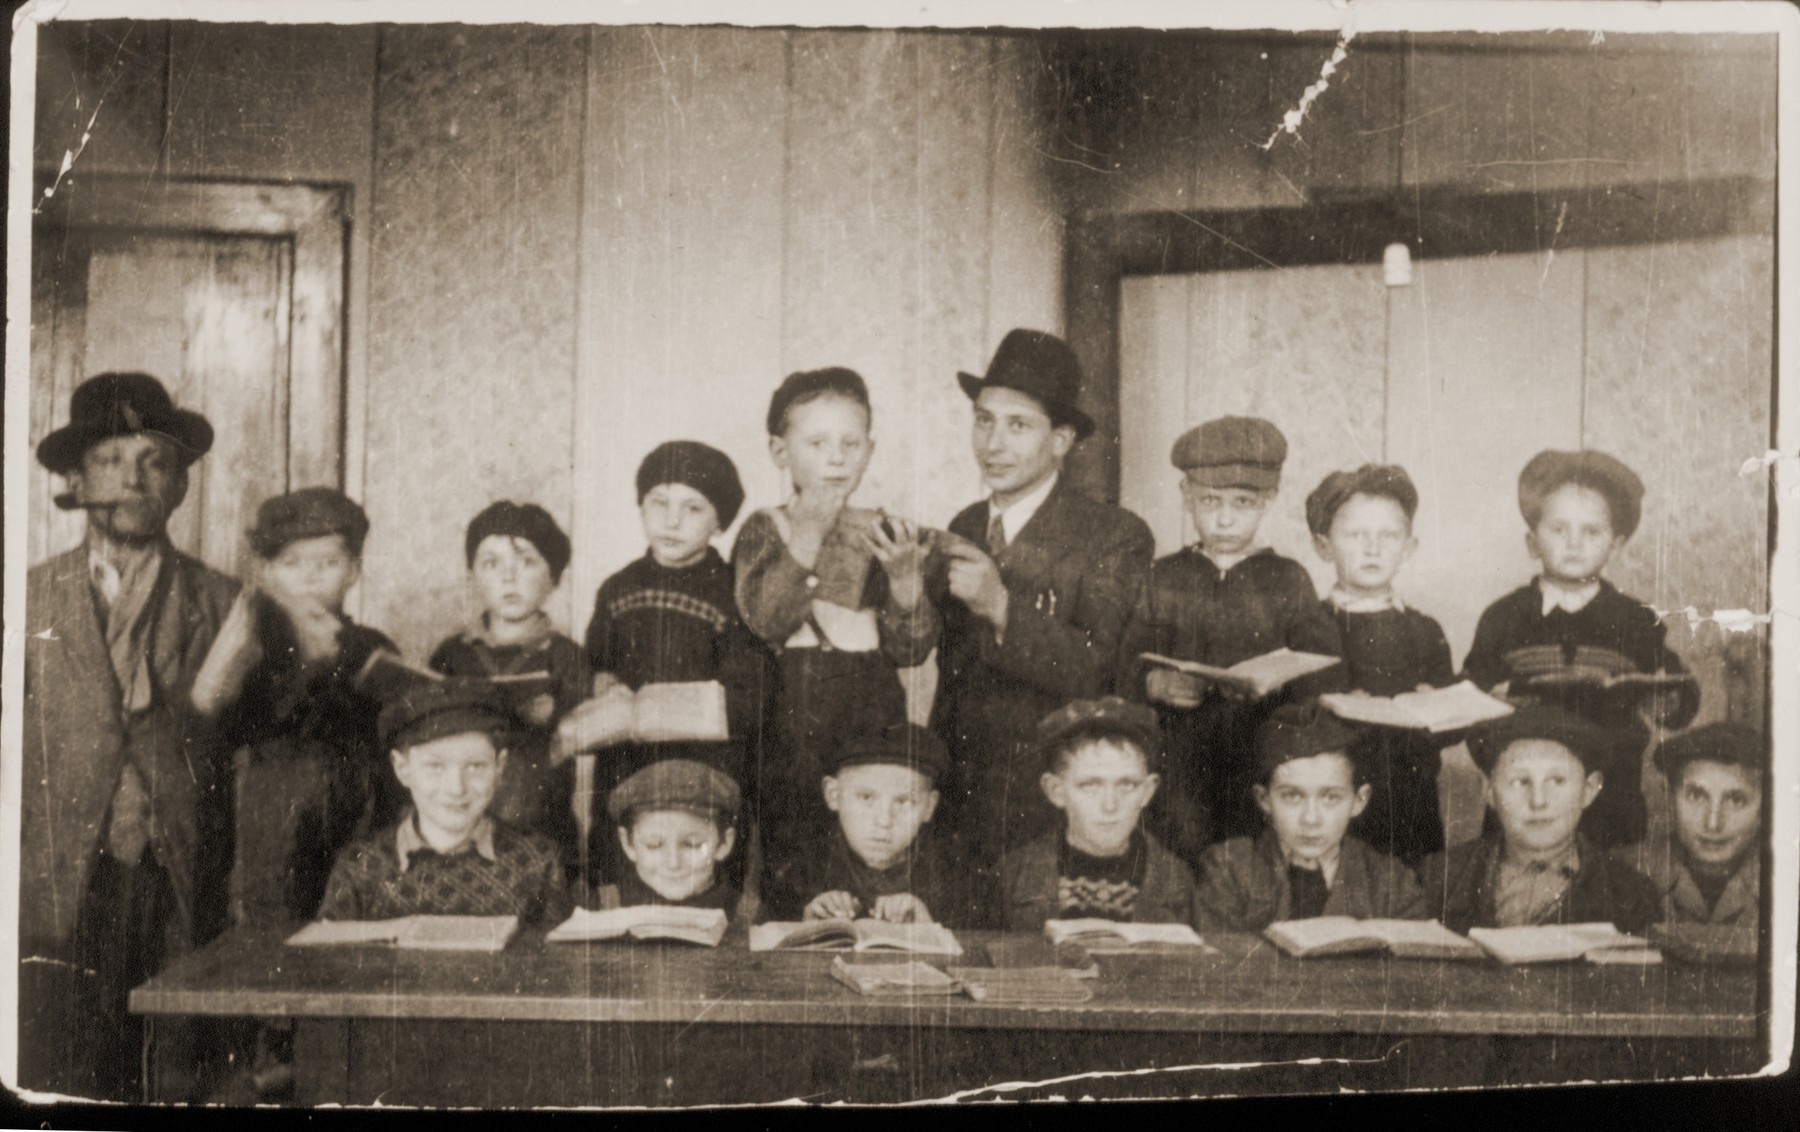 Group portrait of Jewish boys studying traditional Jewish texts at a religious school in the Feldafing displaced persons camp.

Seated from left to right are: Yaakov Stetsky, Moshe Bertram, Alter Rothbart, Moshe Lotman, Aaron Tzuckerman, Moshe Epstein and Avrohom Strikovsky.  Standing from left to right are: the synagogue director, Chaim Birnbaum, Mottel Sobolsky, Leibele Bzshisky, Wolf Strasberg, Avrohom Rosenberg, the teacher, Meir Katz, Shimon Lipinsky, and Chaim Frashkir.